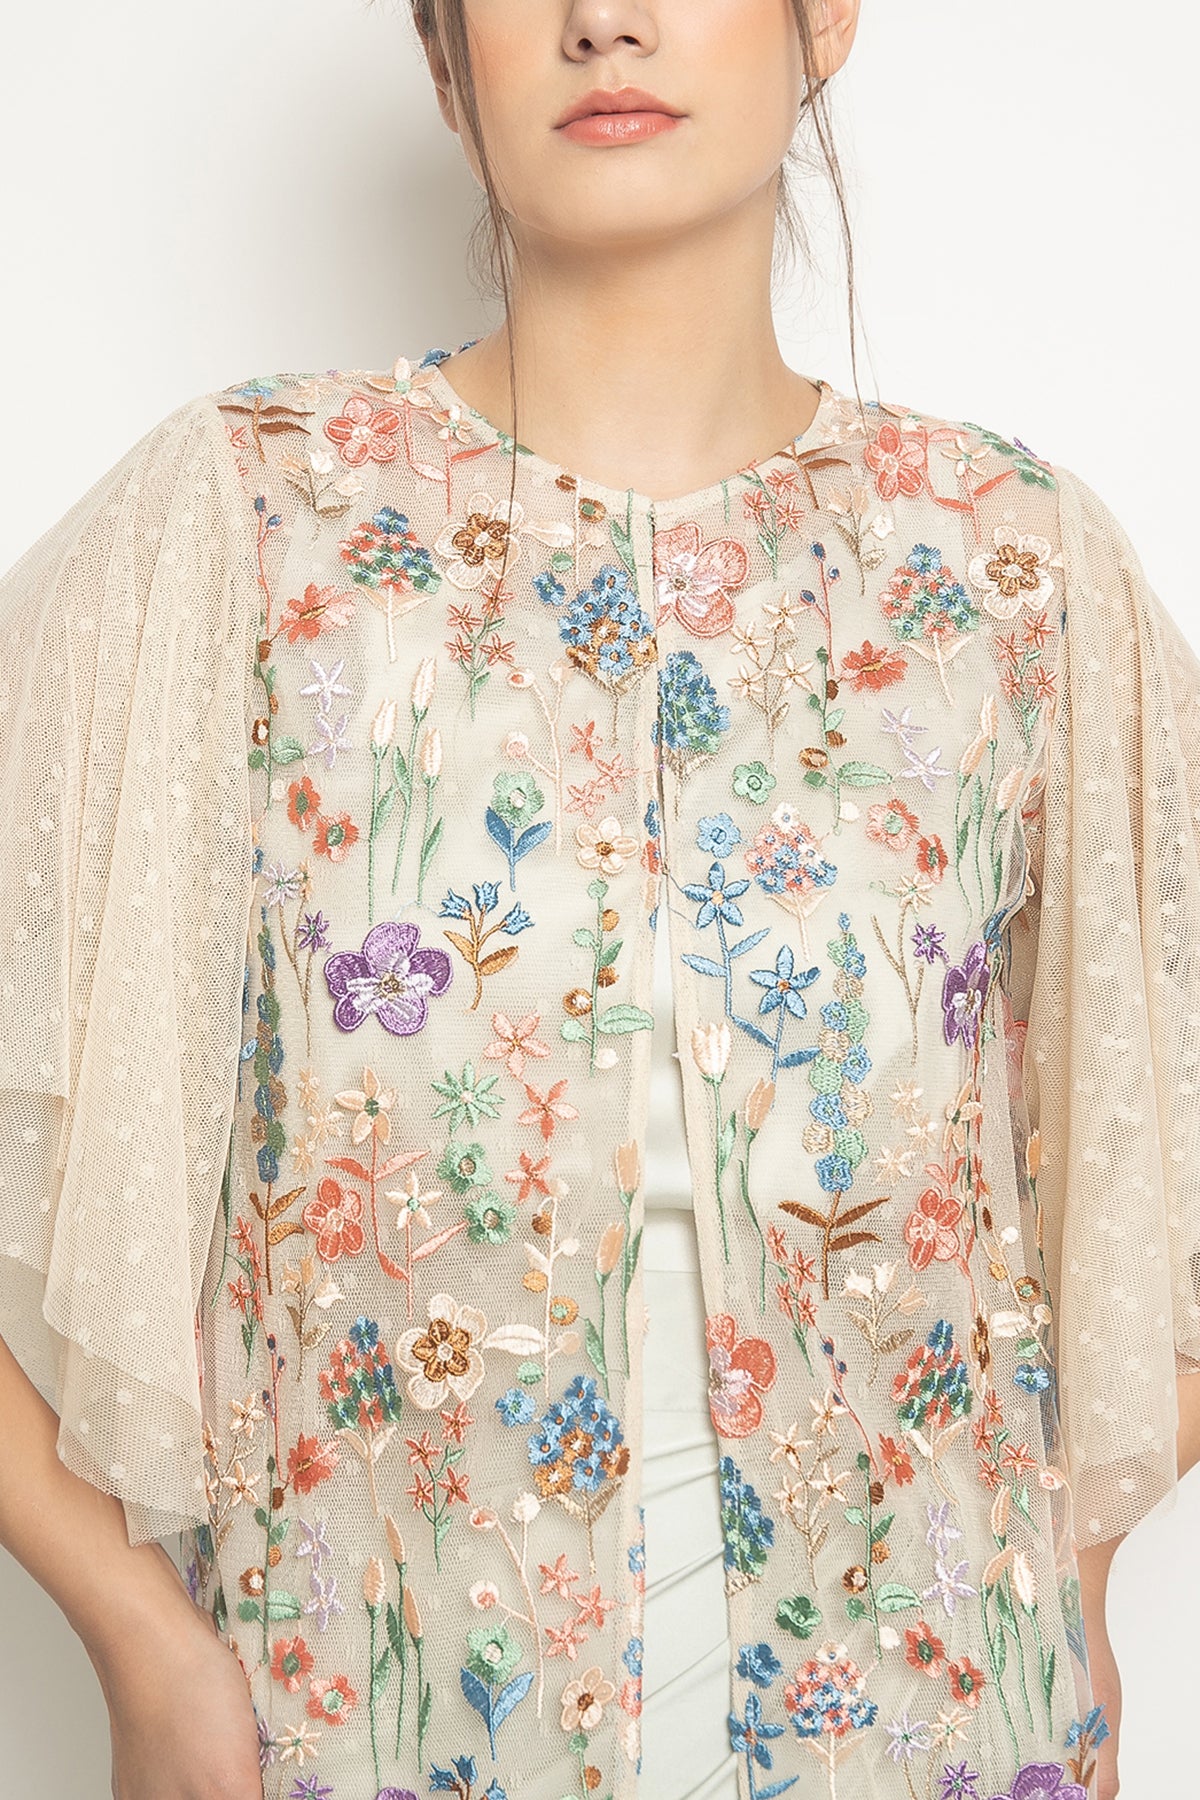 Linnea Outer Top in White Floral